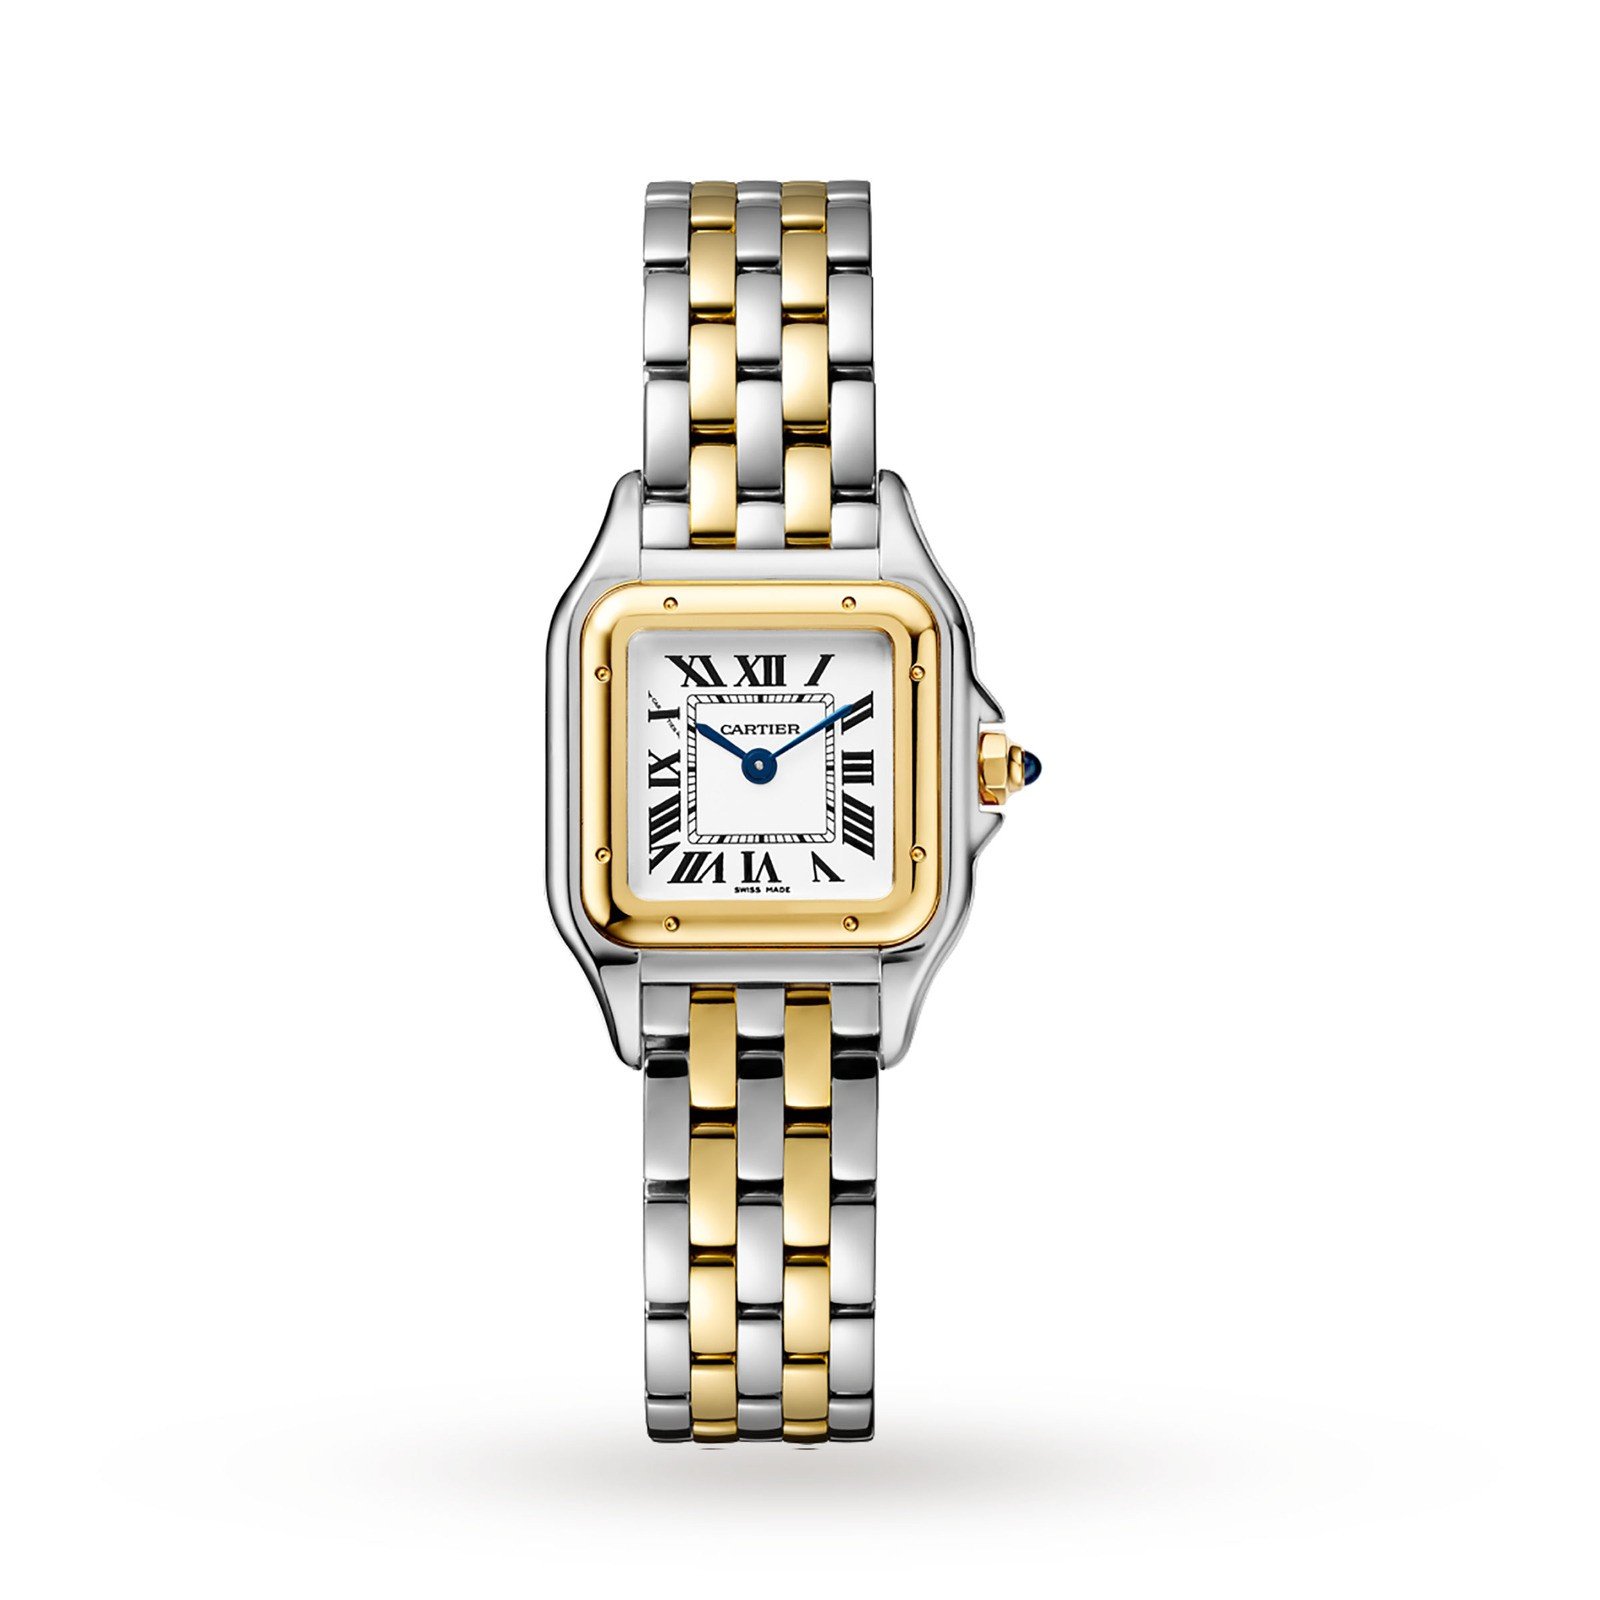 Swiss Panthère de Cartier watch, Small model, yellow gold and steel